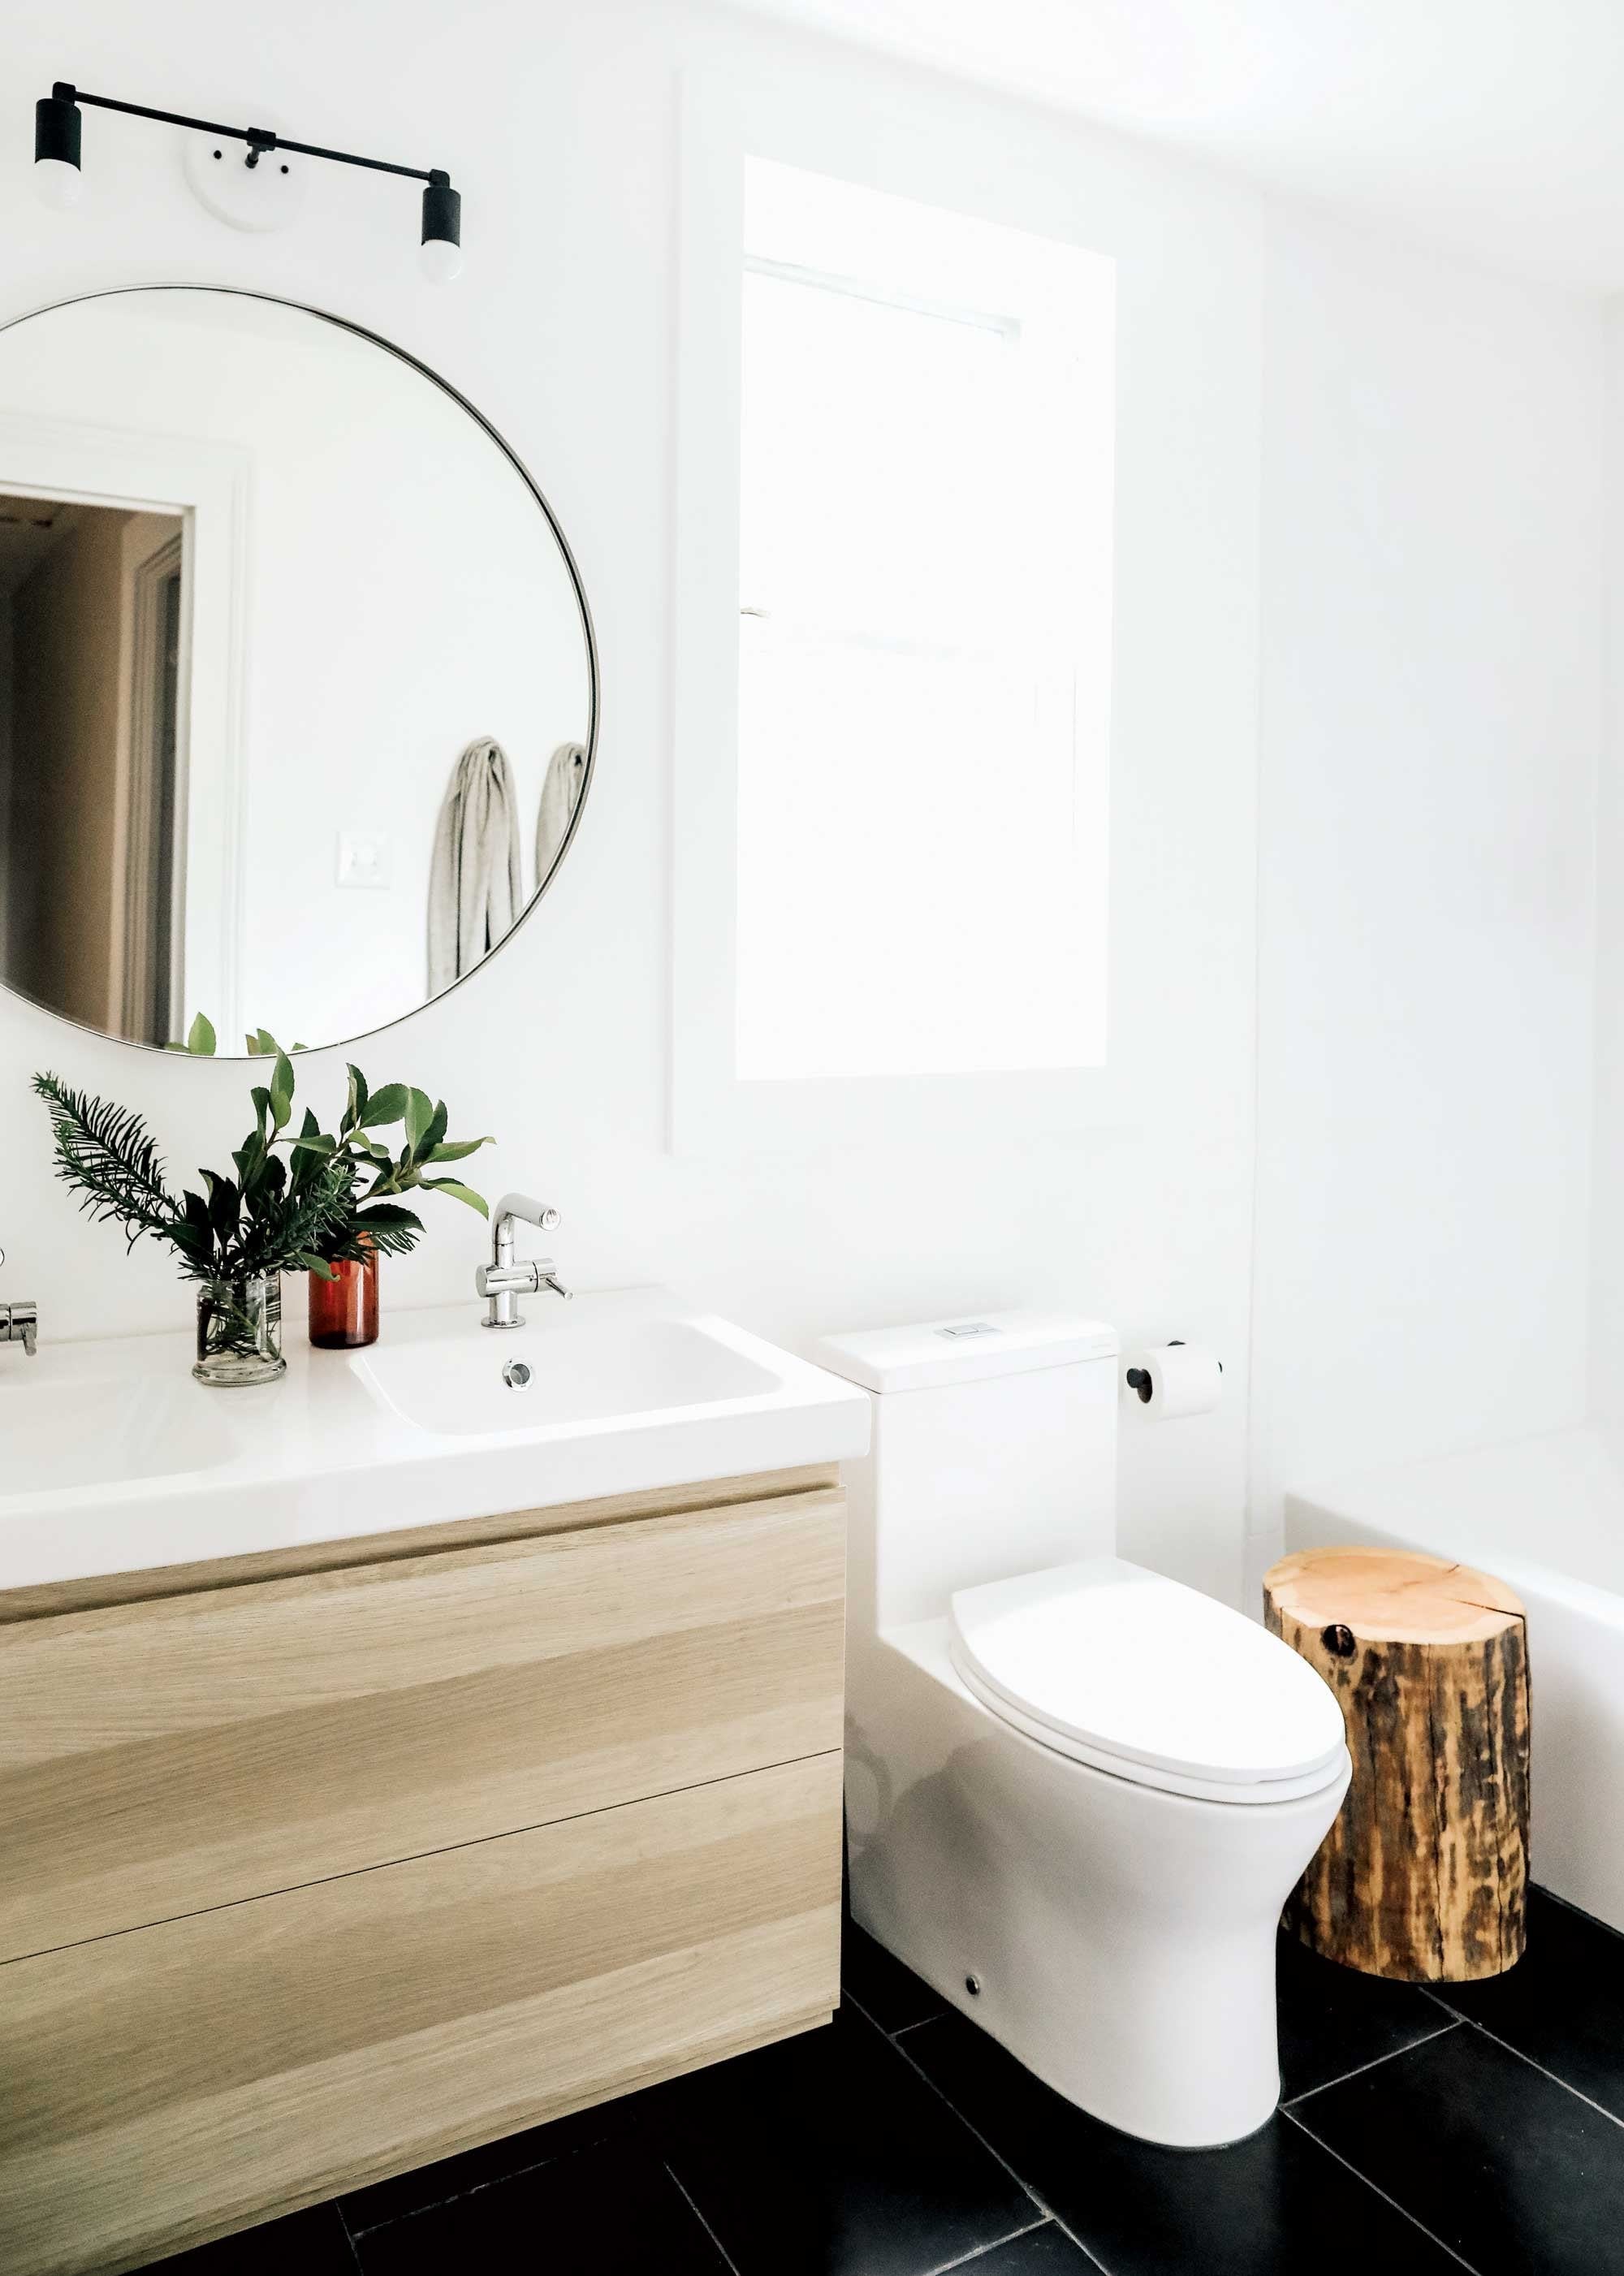 How To Light Up Your Bathroom With Images Bathroom Mirror